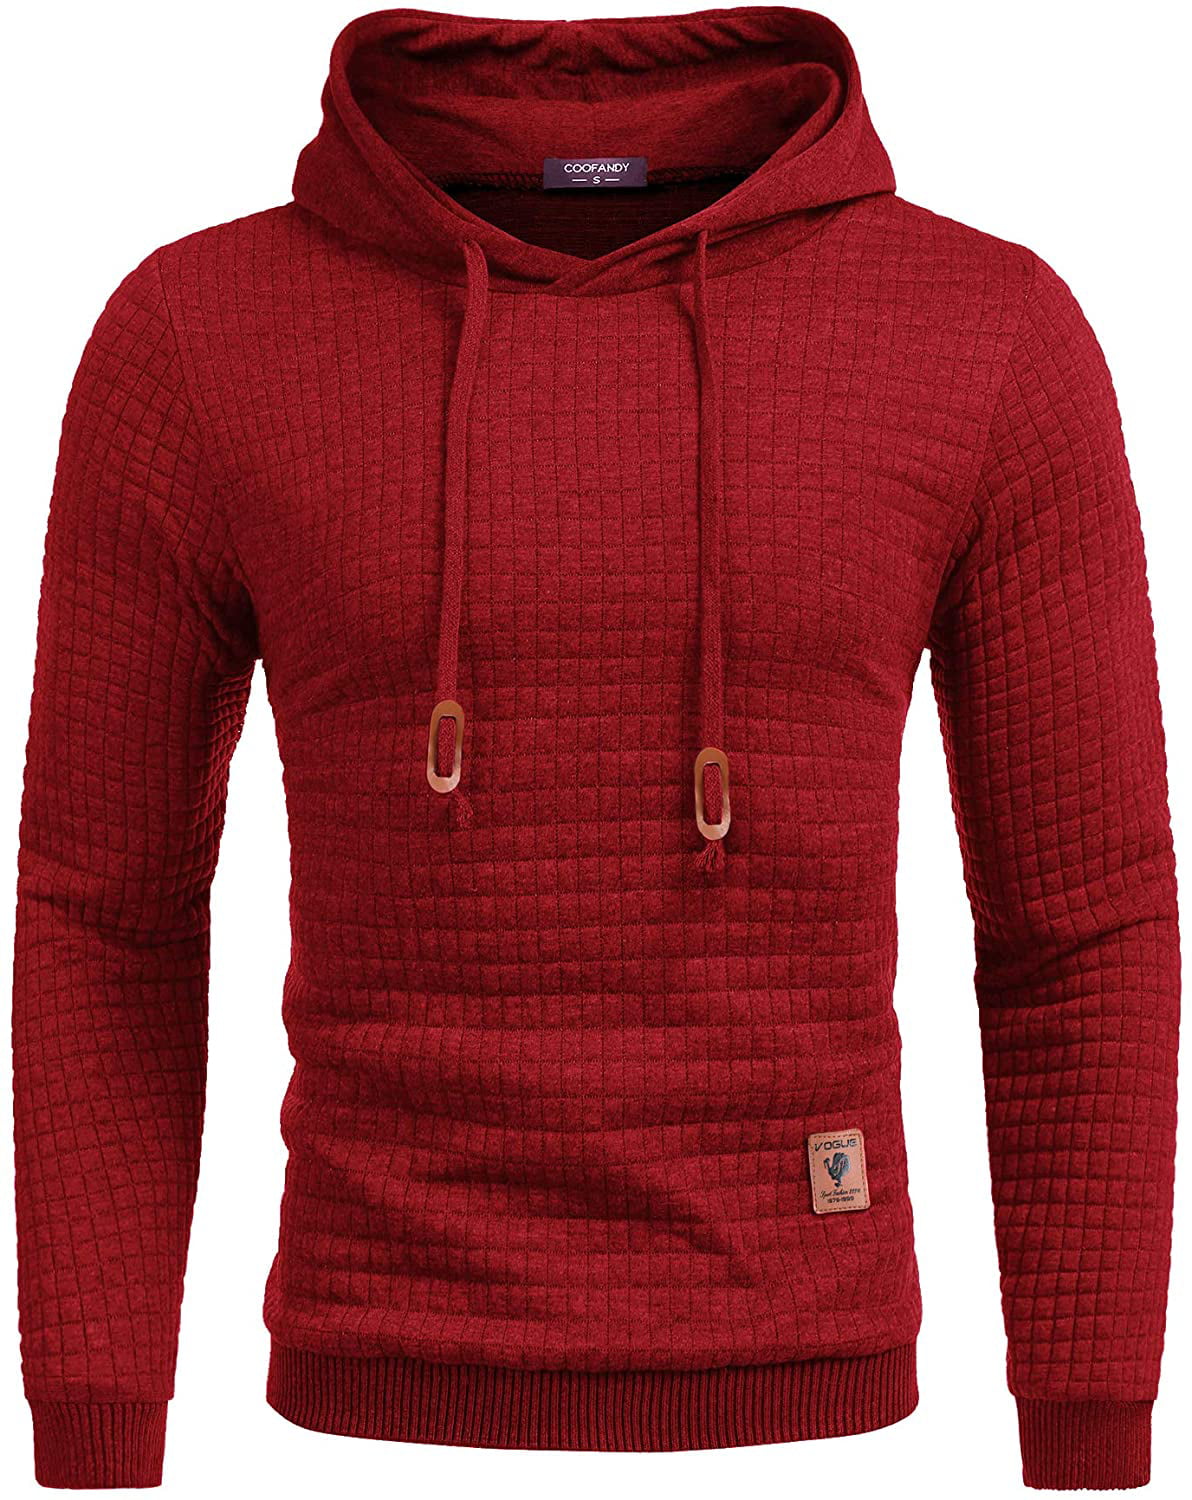 COOFANDY Men's Hooded Sweatshirt Long Sleeve Fashion Gym Athletic Hoodies Solid Plaid Jacquard Pullover with Pocket 